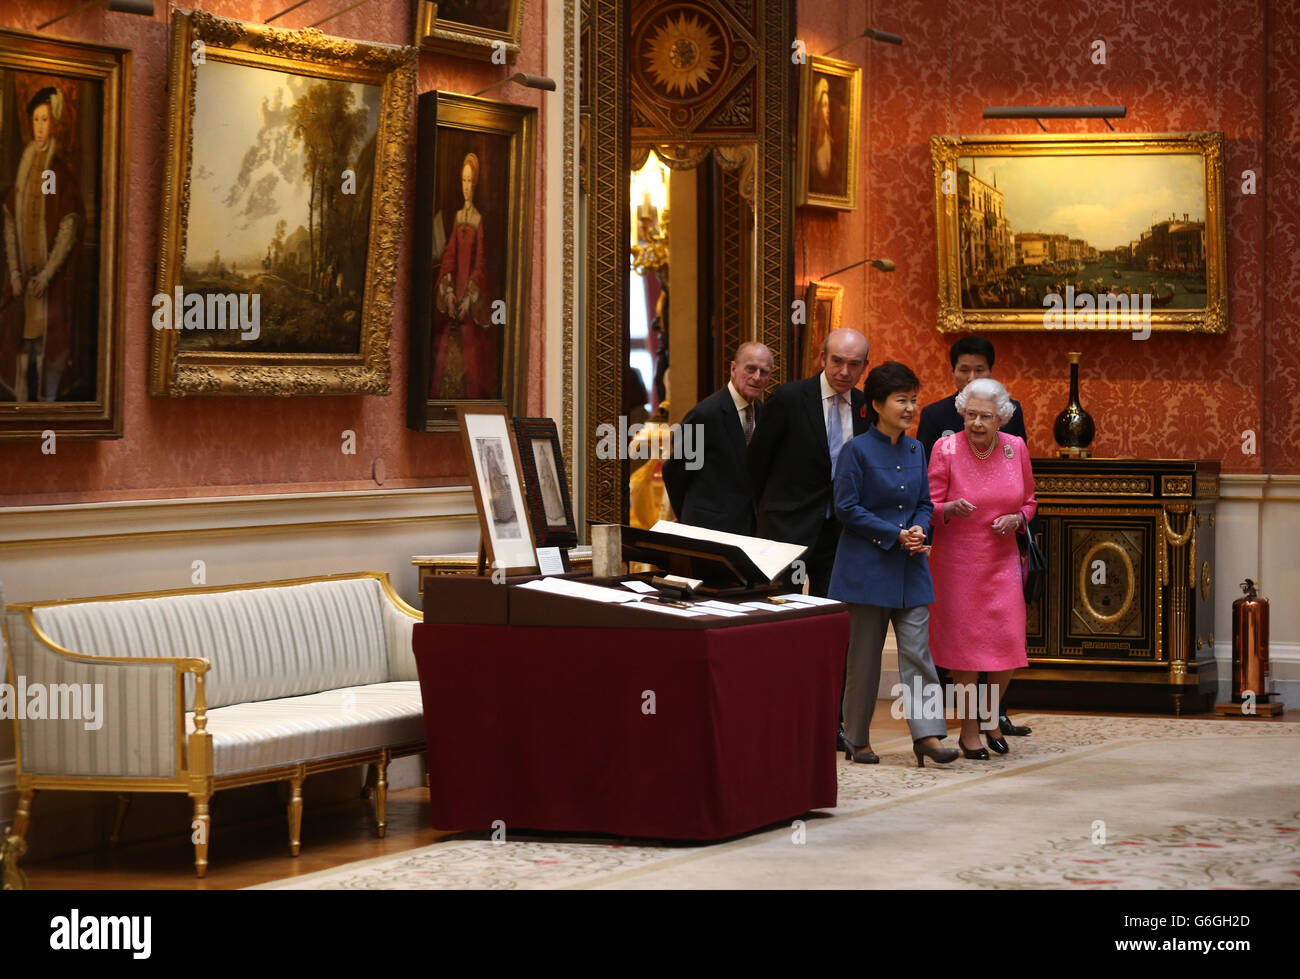 The President of the Republic of Korea Park Geun-Hye (centre), the Duke of Edinburgh (left) and Queen Elizabeth II (right) arrive to look at an exhibition of Korean related items from the Royal Collection and Royal Archives in the Picture Gallery of Buckingham Palace in London, England. The President of the Republic of Korea Park Geun-Hye is on a State Visit to the United Kingdom and during the trip she will attend a state banquet and visit Downing Street. Stock Photo